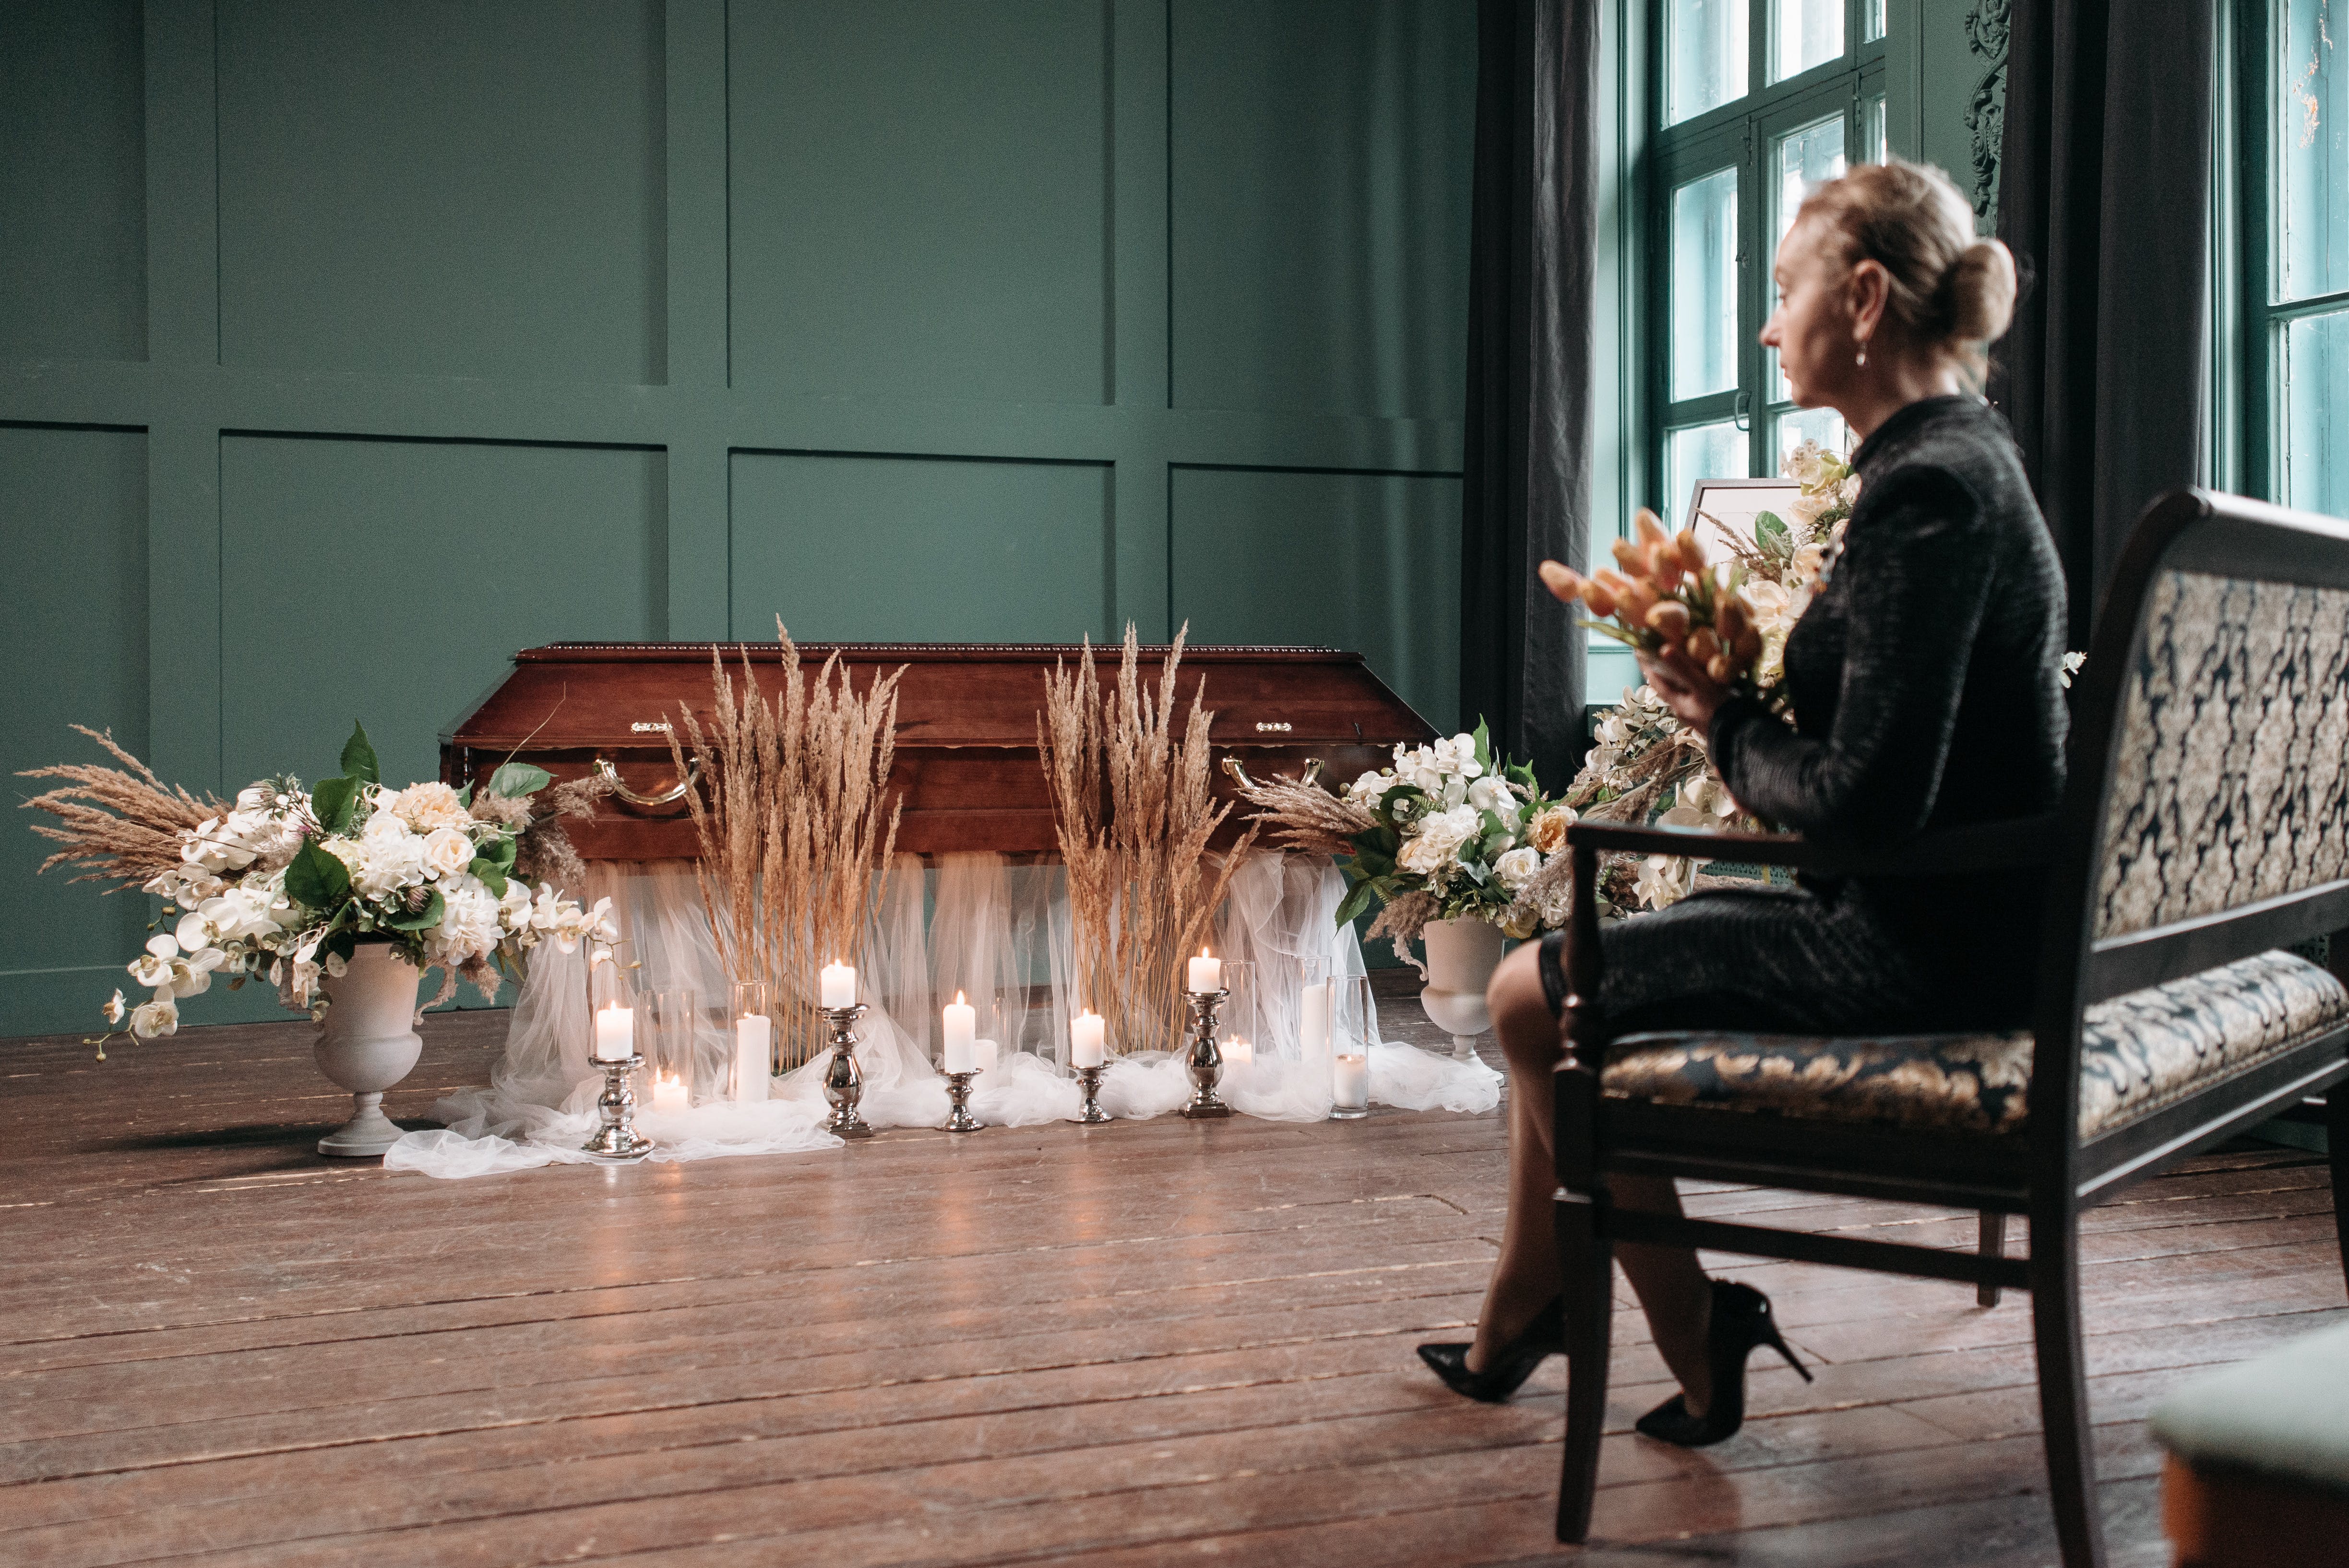 A woman sitting with flowers in hand while starring at a coffin | Source: Pexels